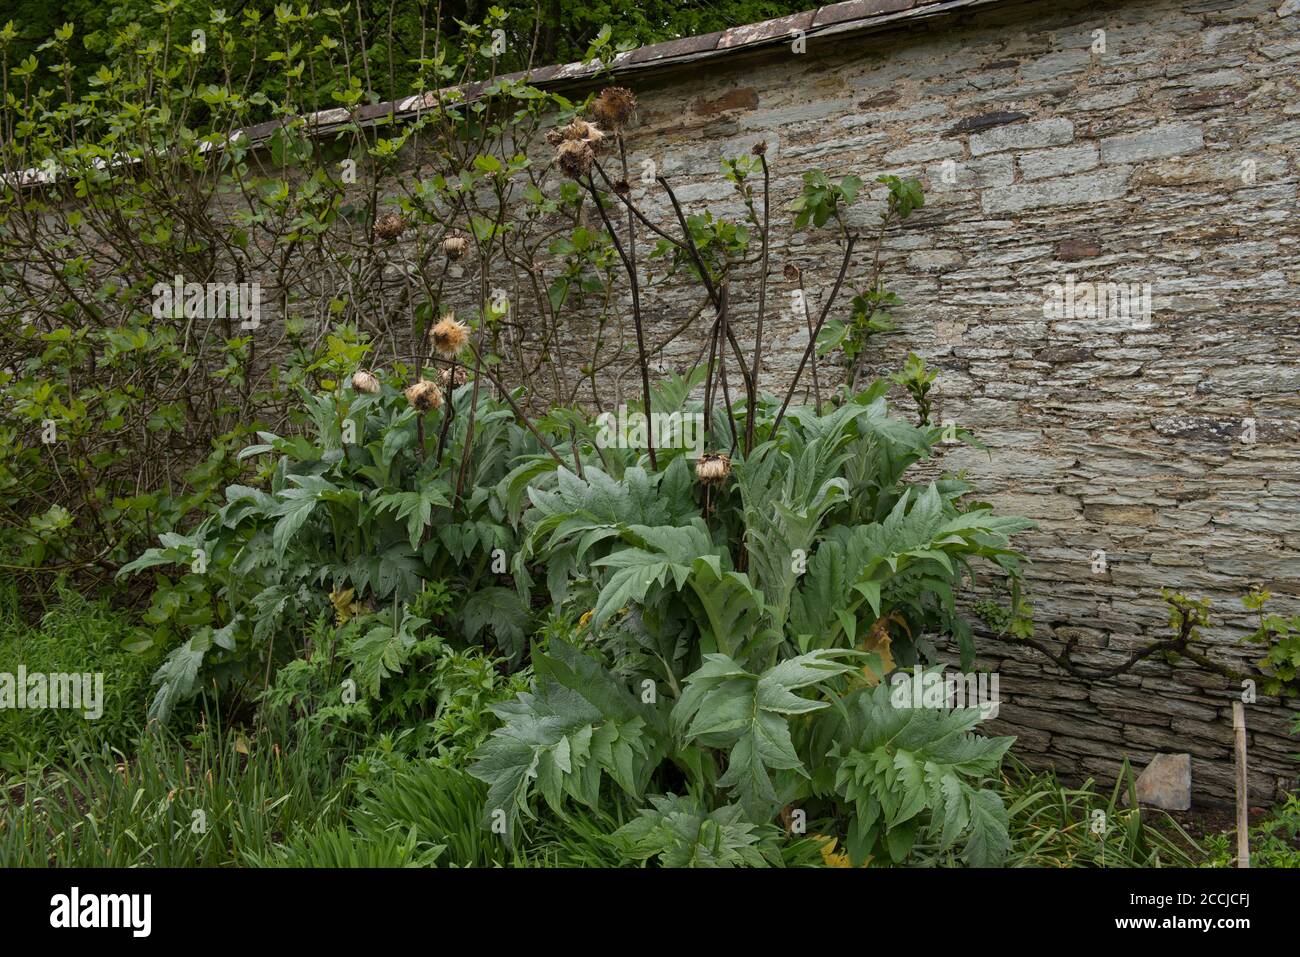 Flower Heads on a Globe Artichoke Plant (Cynara cardunculus var. scolymus) Growing by a Stone Wall on an Organic Allotment in a Vegetable Garden Stock Photo